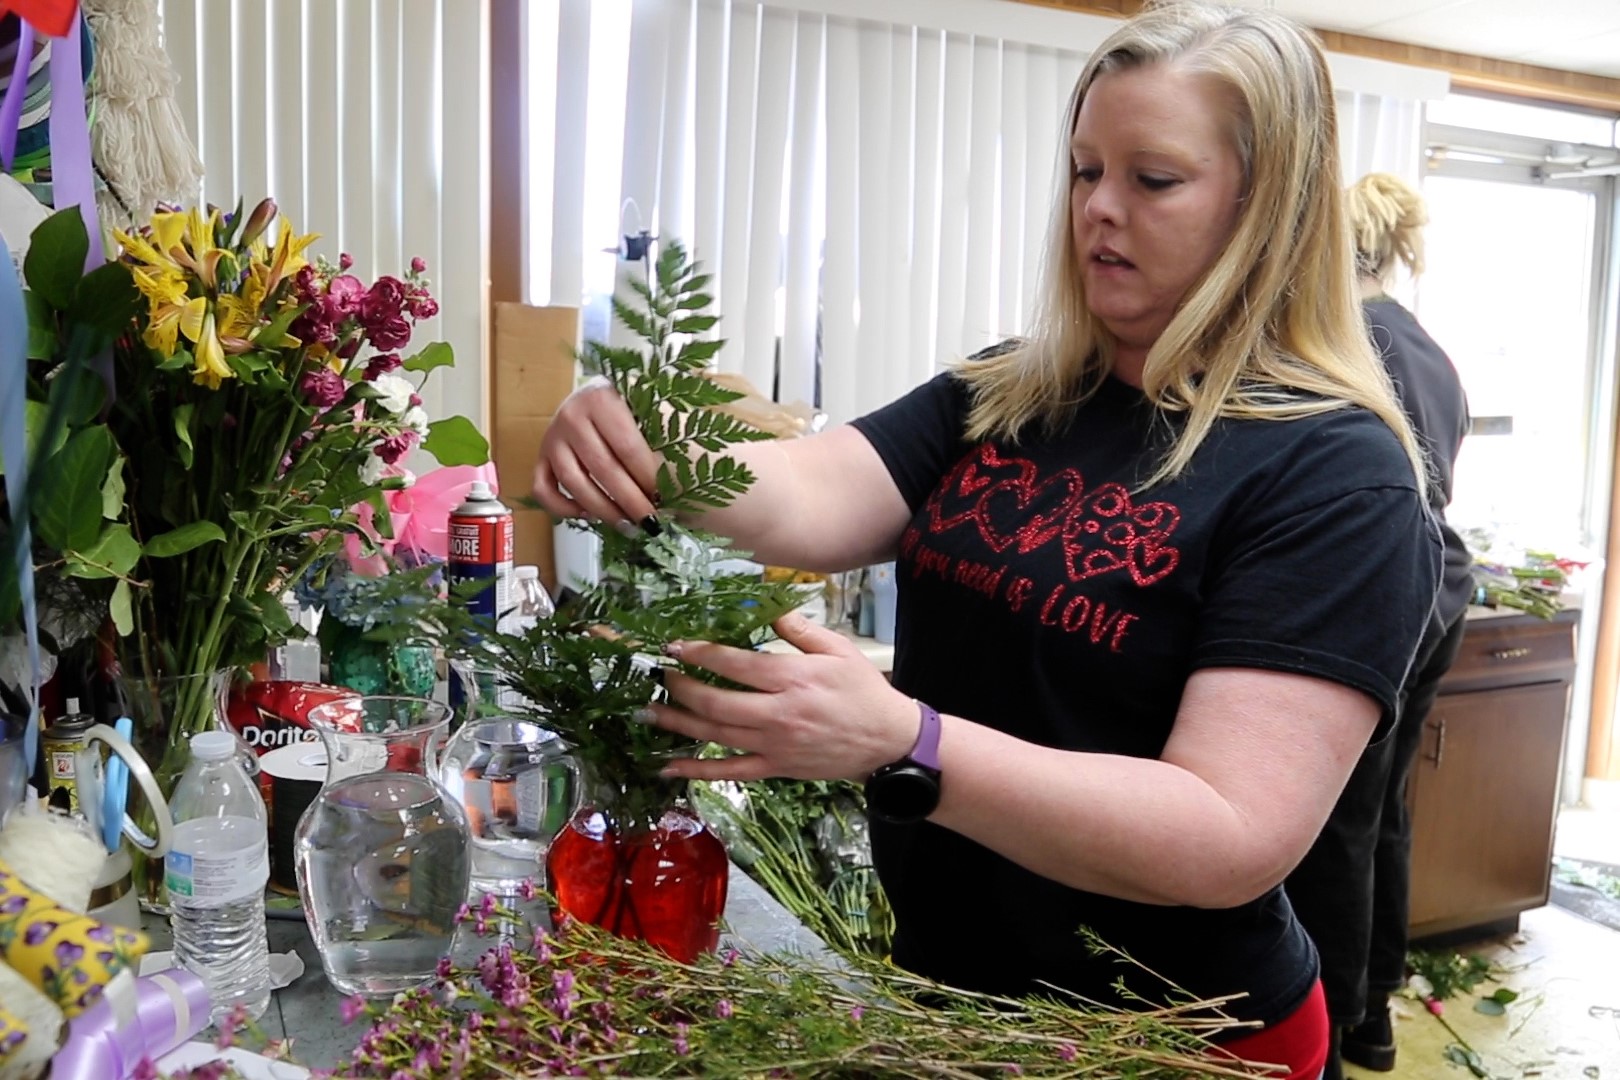 A worker at Mary M's assembles a vase for Valentine's Day